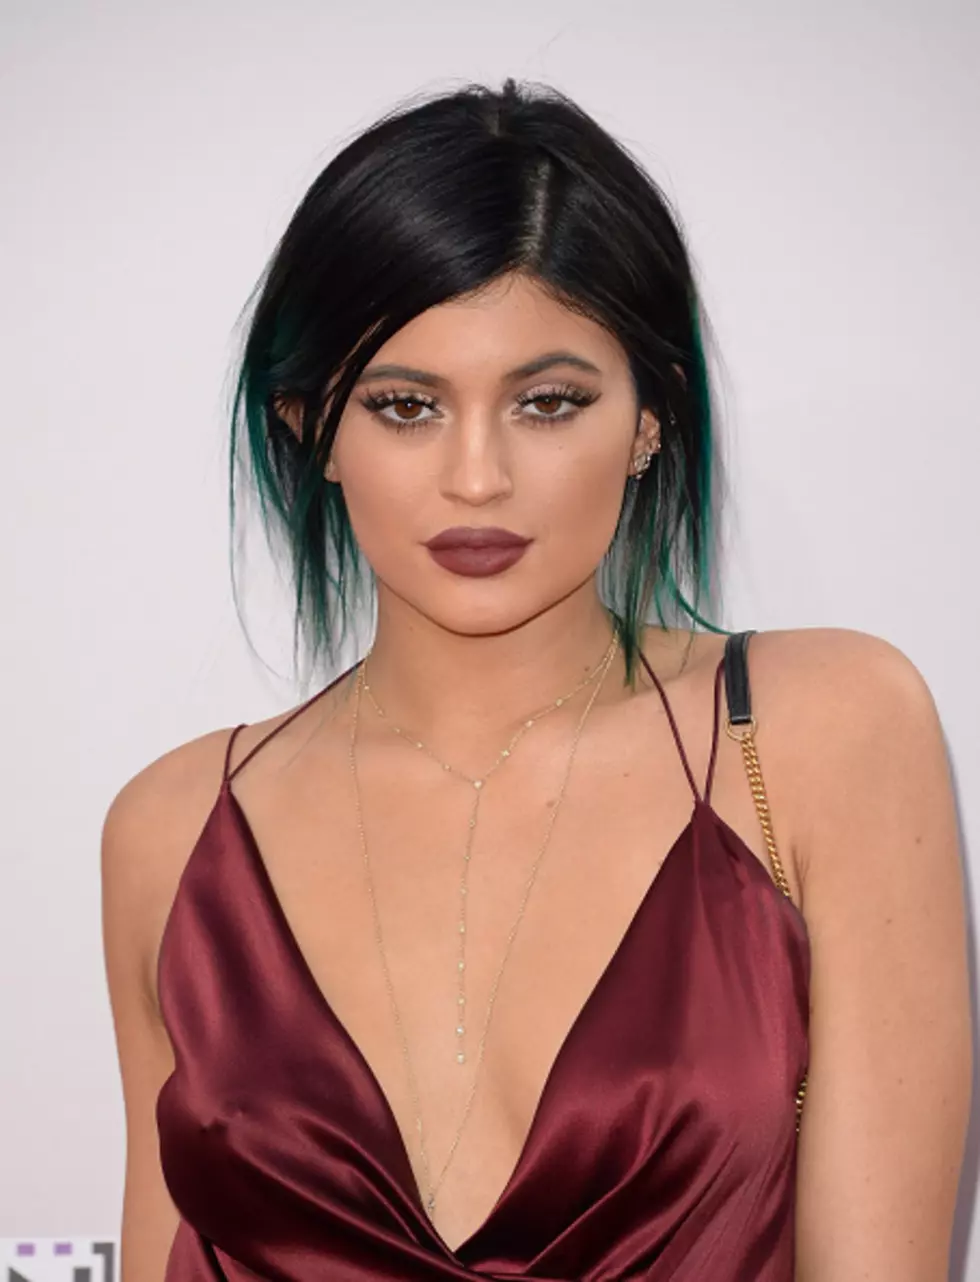 Will Rapper Tyga Be Kylie Jenner’s Baby Daddy?